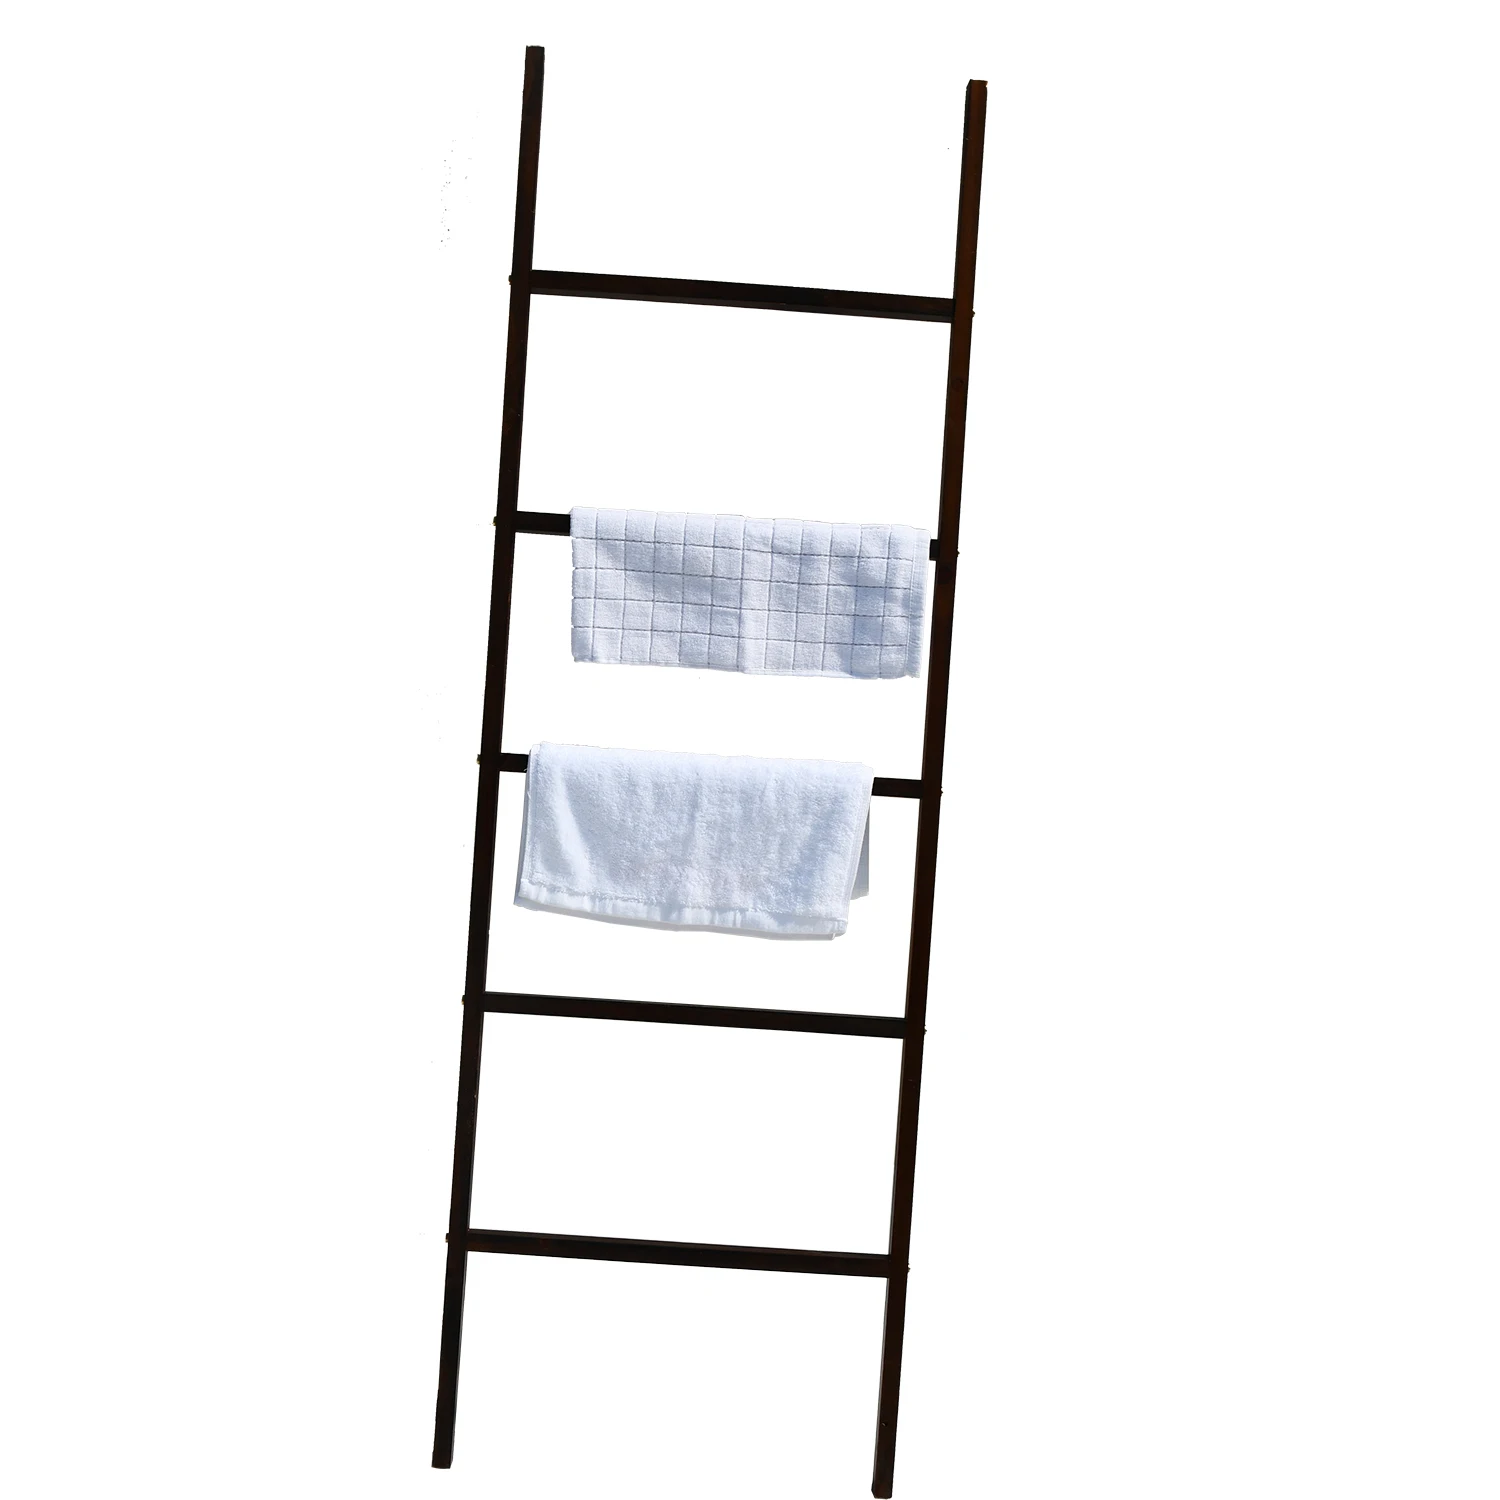 Foot Wall Leaning Blanket Ladder, Laminate Snag Free Construction (brown) Farmhouse Home Decor, Decorative Blanket, Quilt, Towel